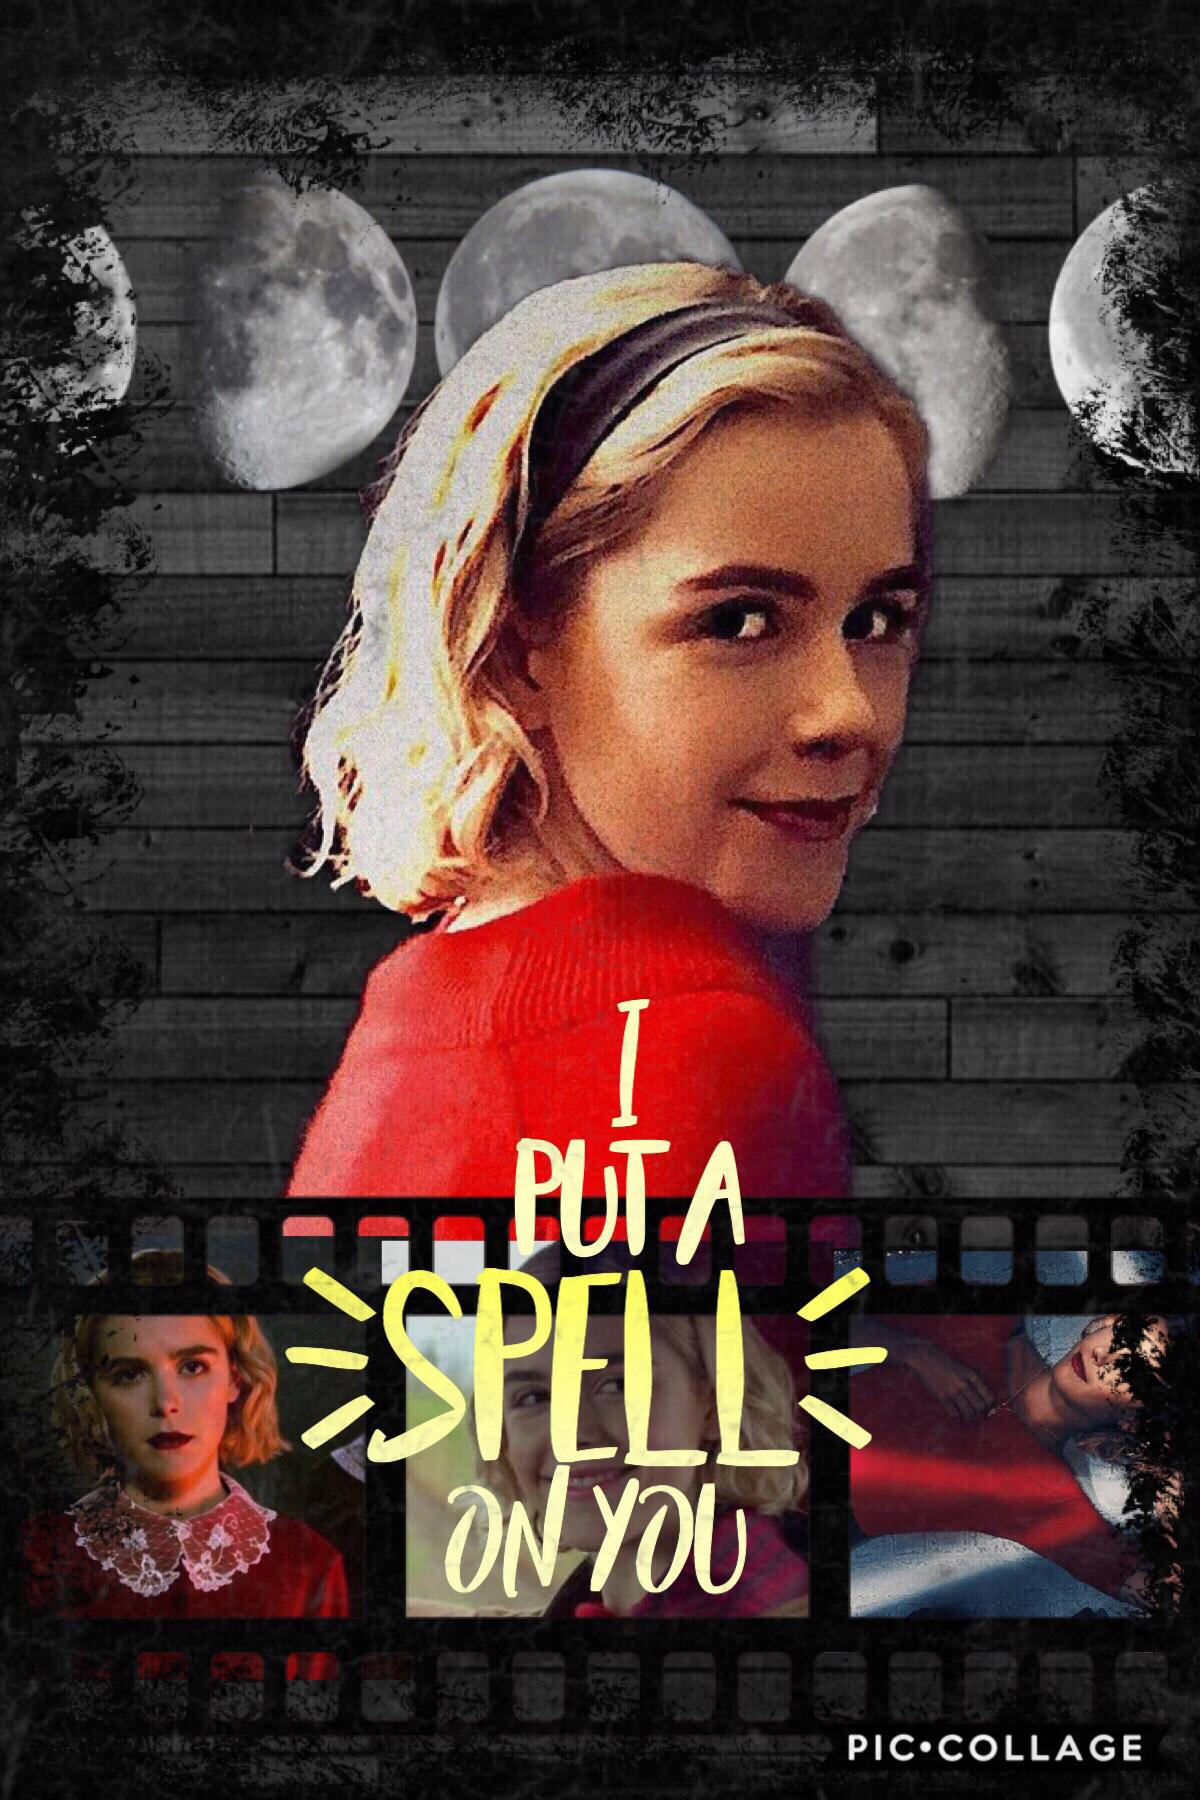 Tap🐄
Okay so real talk, I started watching Chilling Adventures of Sabrina last night and it’s actually really good, so i just had to make an edit! 
QOTD: What’s a song you’ve been obsessively listening to? 